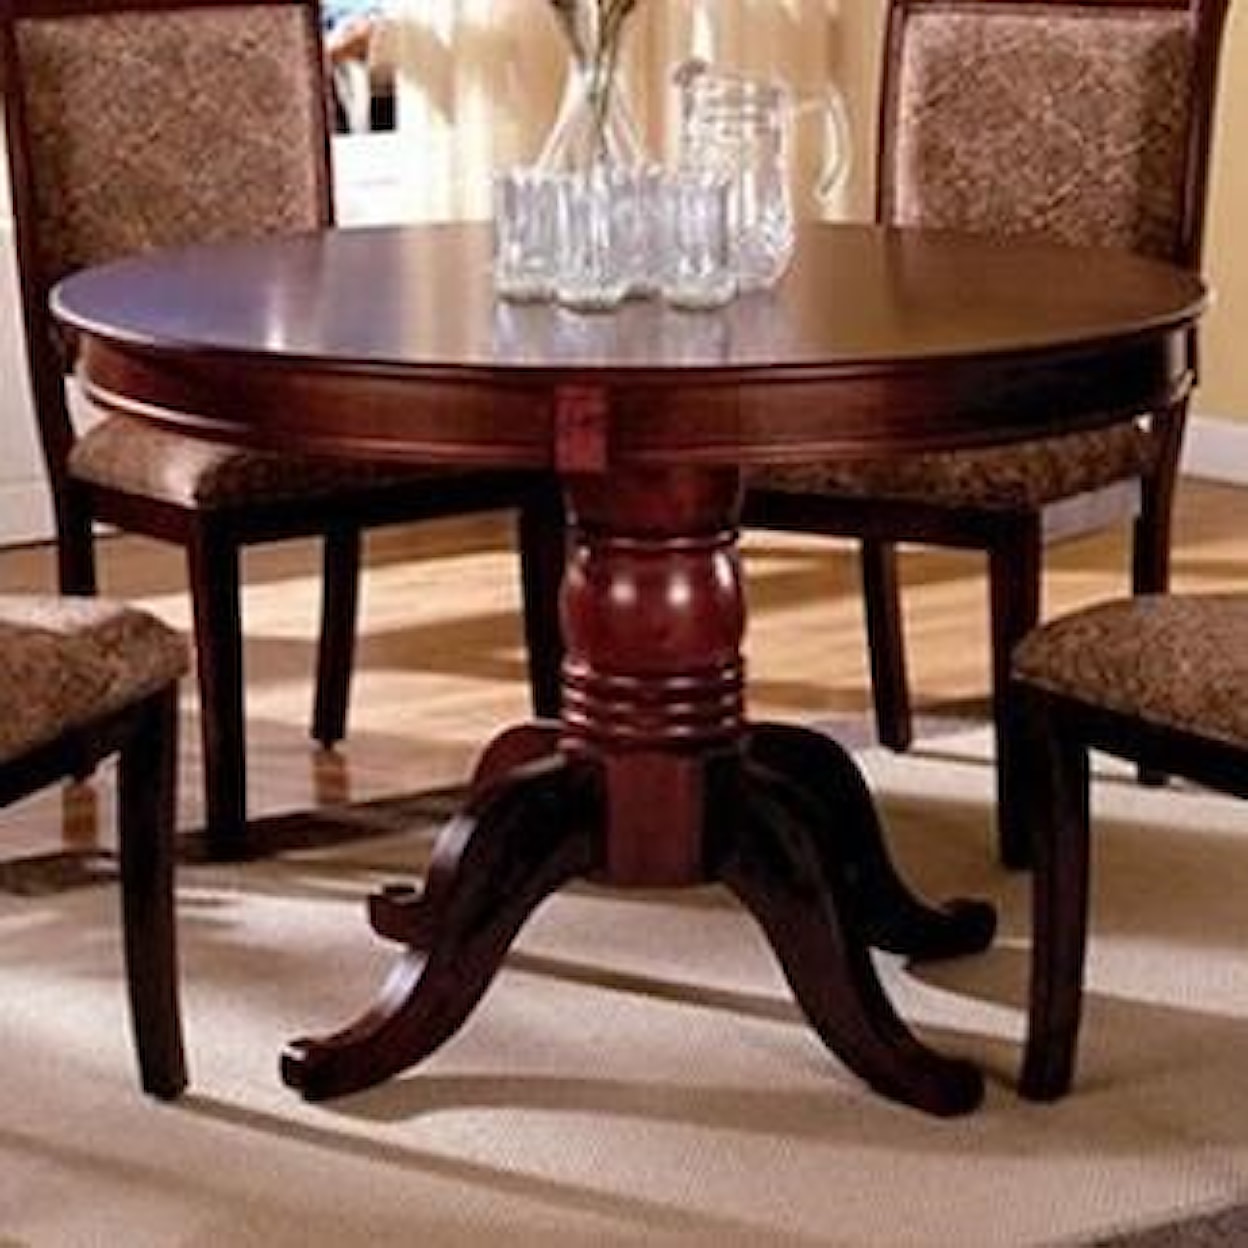 Furniture of America St. Nicholas II Round Dining Table